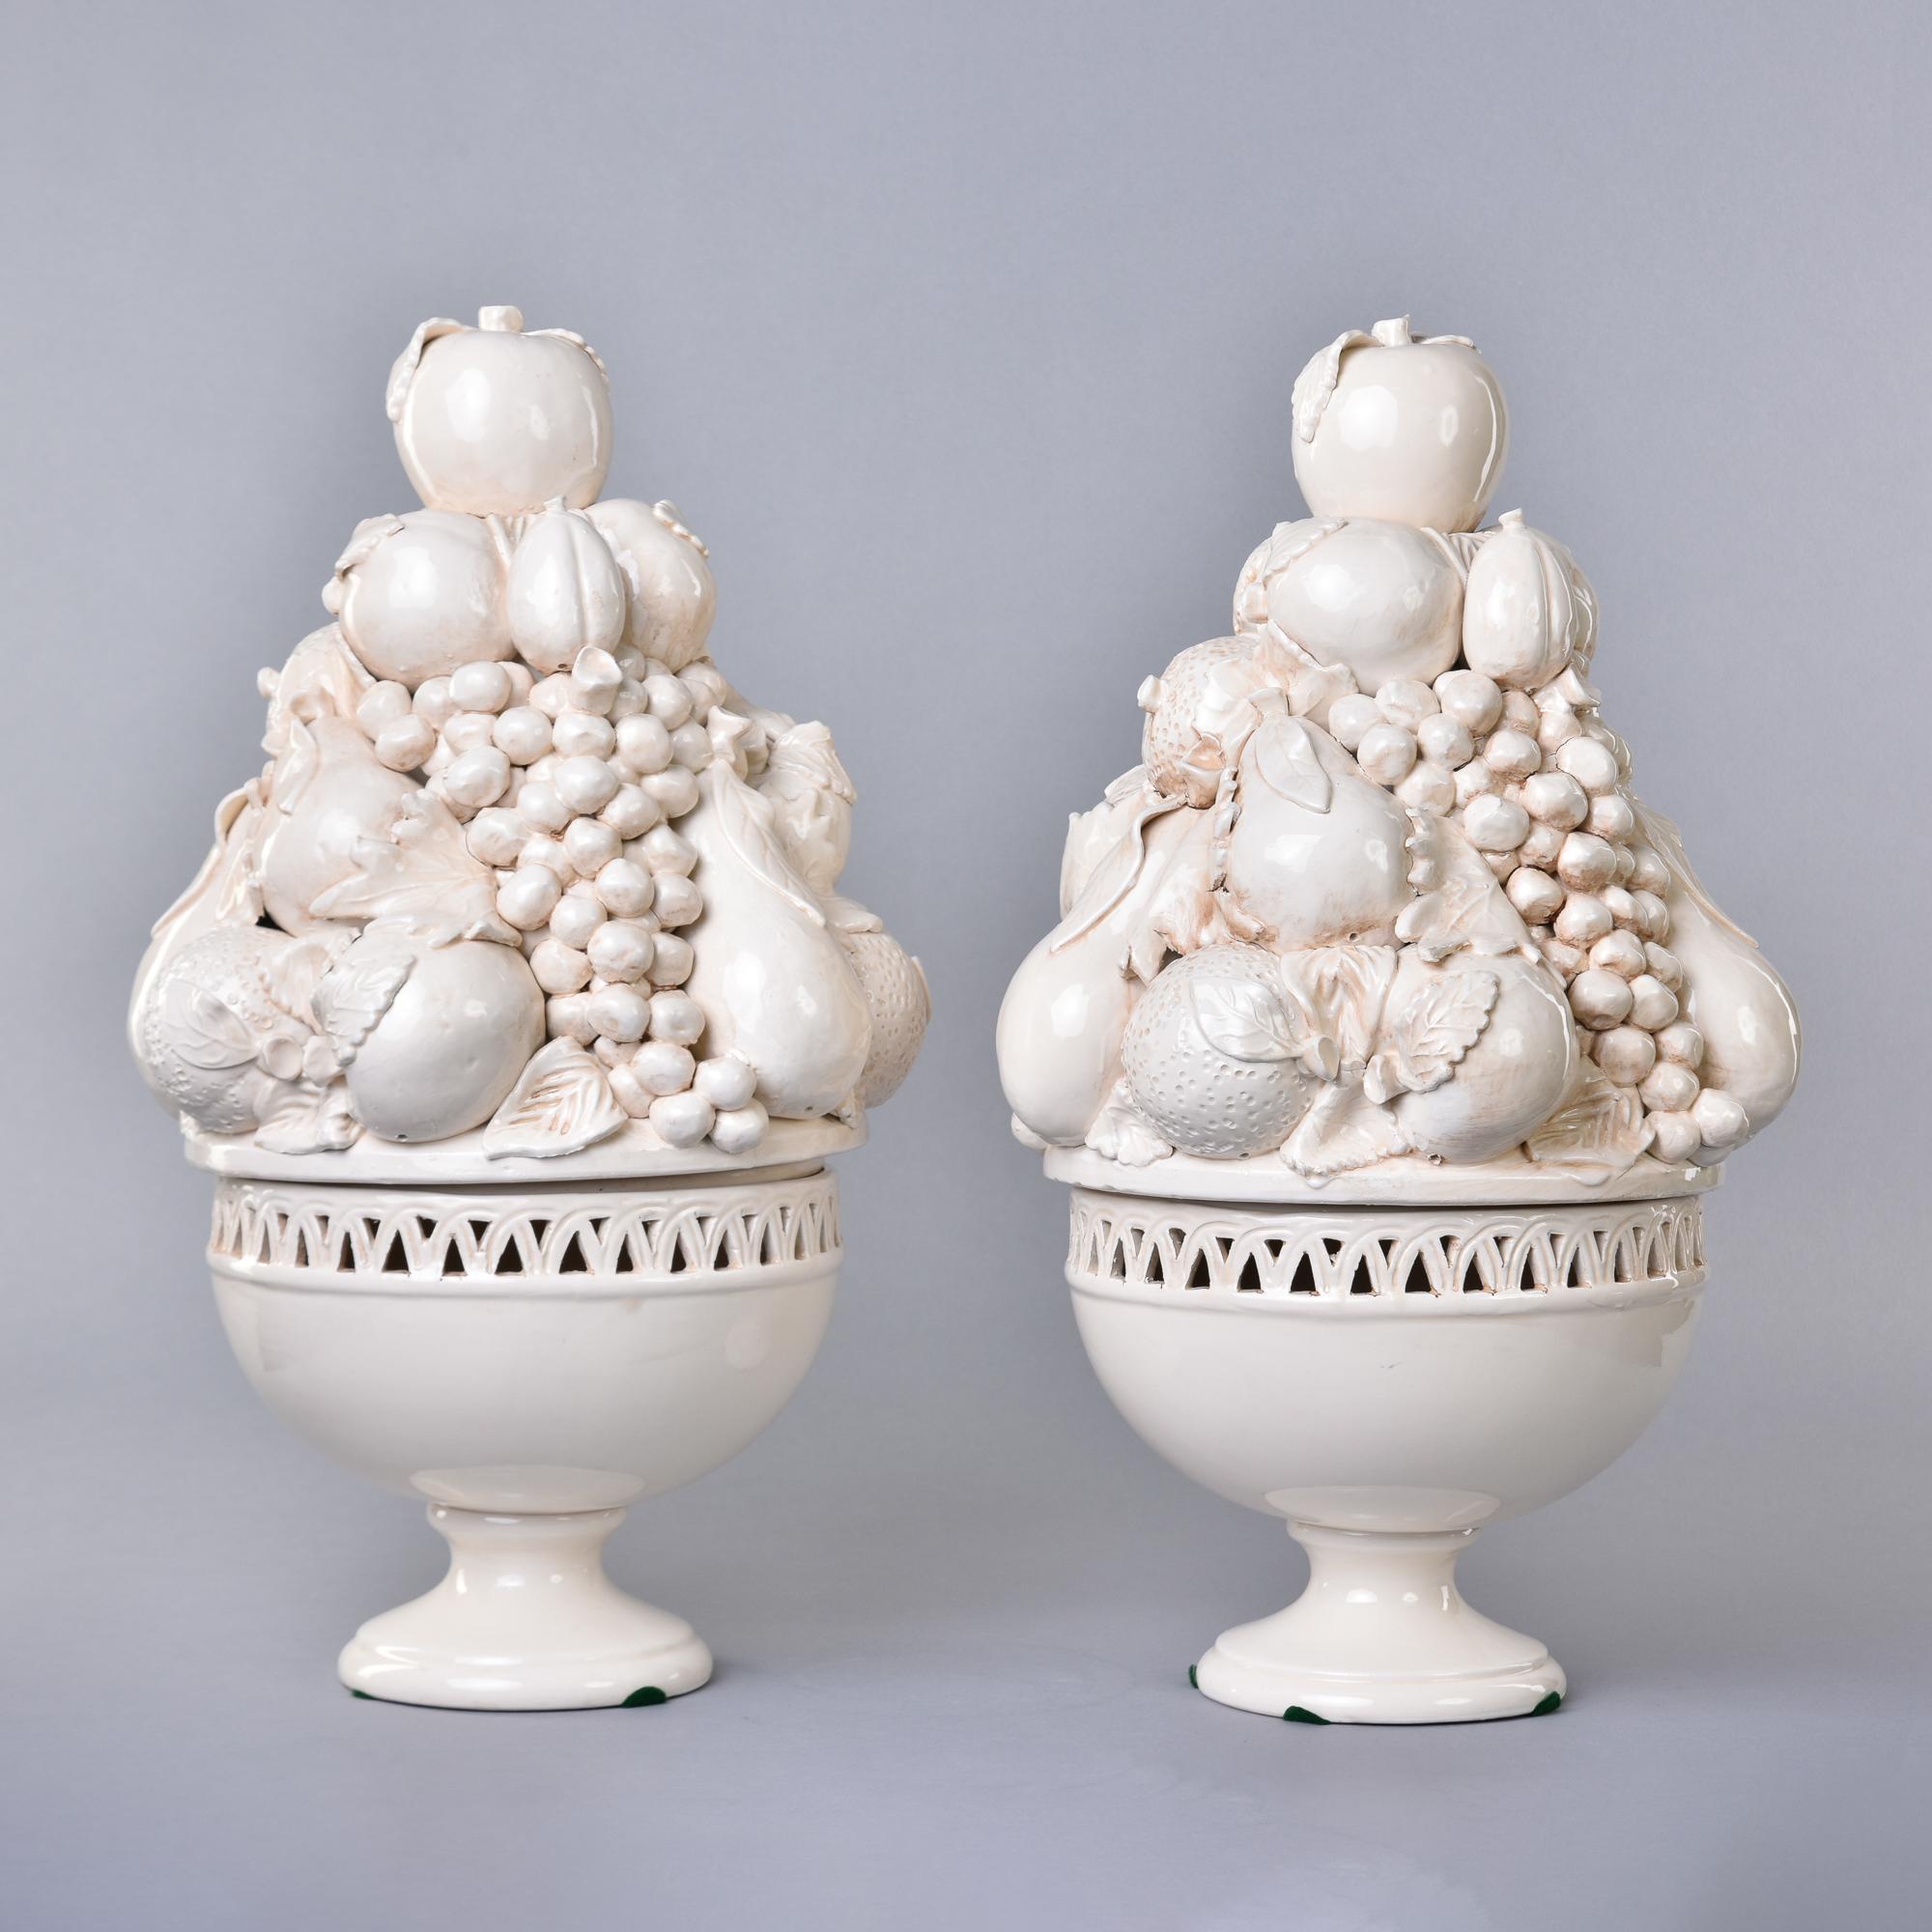 Found in Italy, this is a new pair of Italian-made lidded fruit garniture bowls in a creamy off-white glaze. Pedestal base with rim of bowl decorated with cut out border. Removable tops are well-rendered tall ceramic fruit displays depicting grapes,